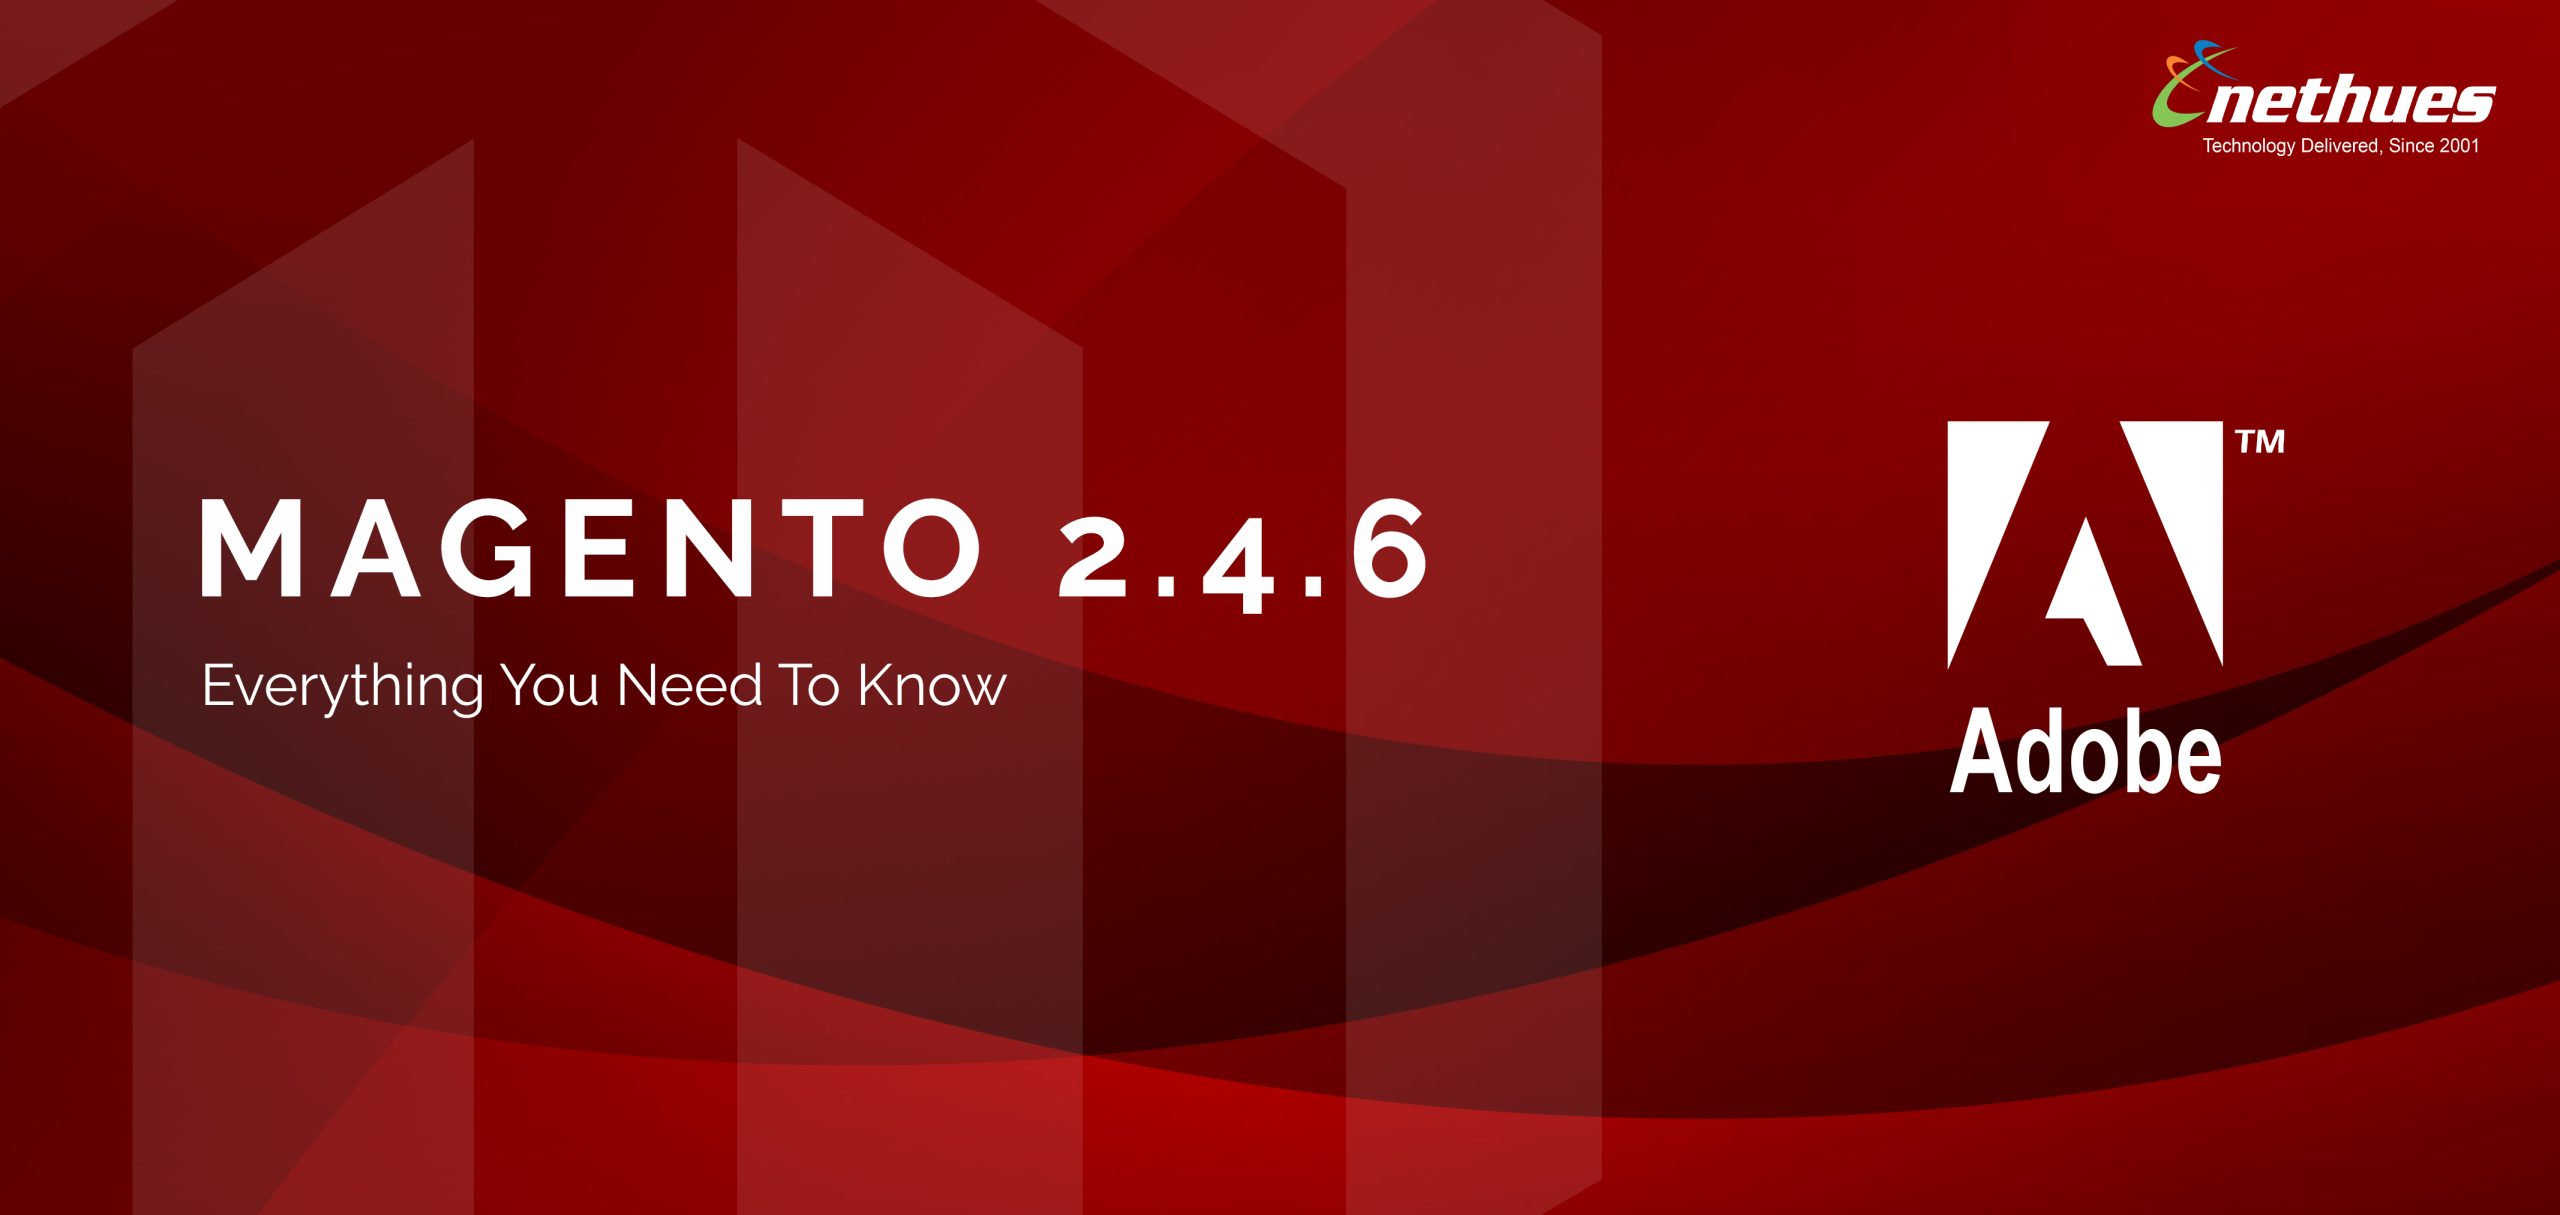 New Magento 2.4.6 Release: Everything You Need To Know